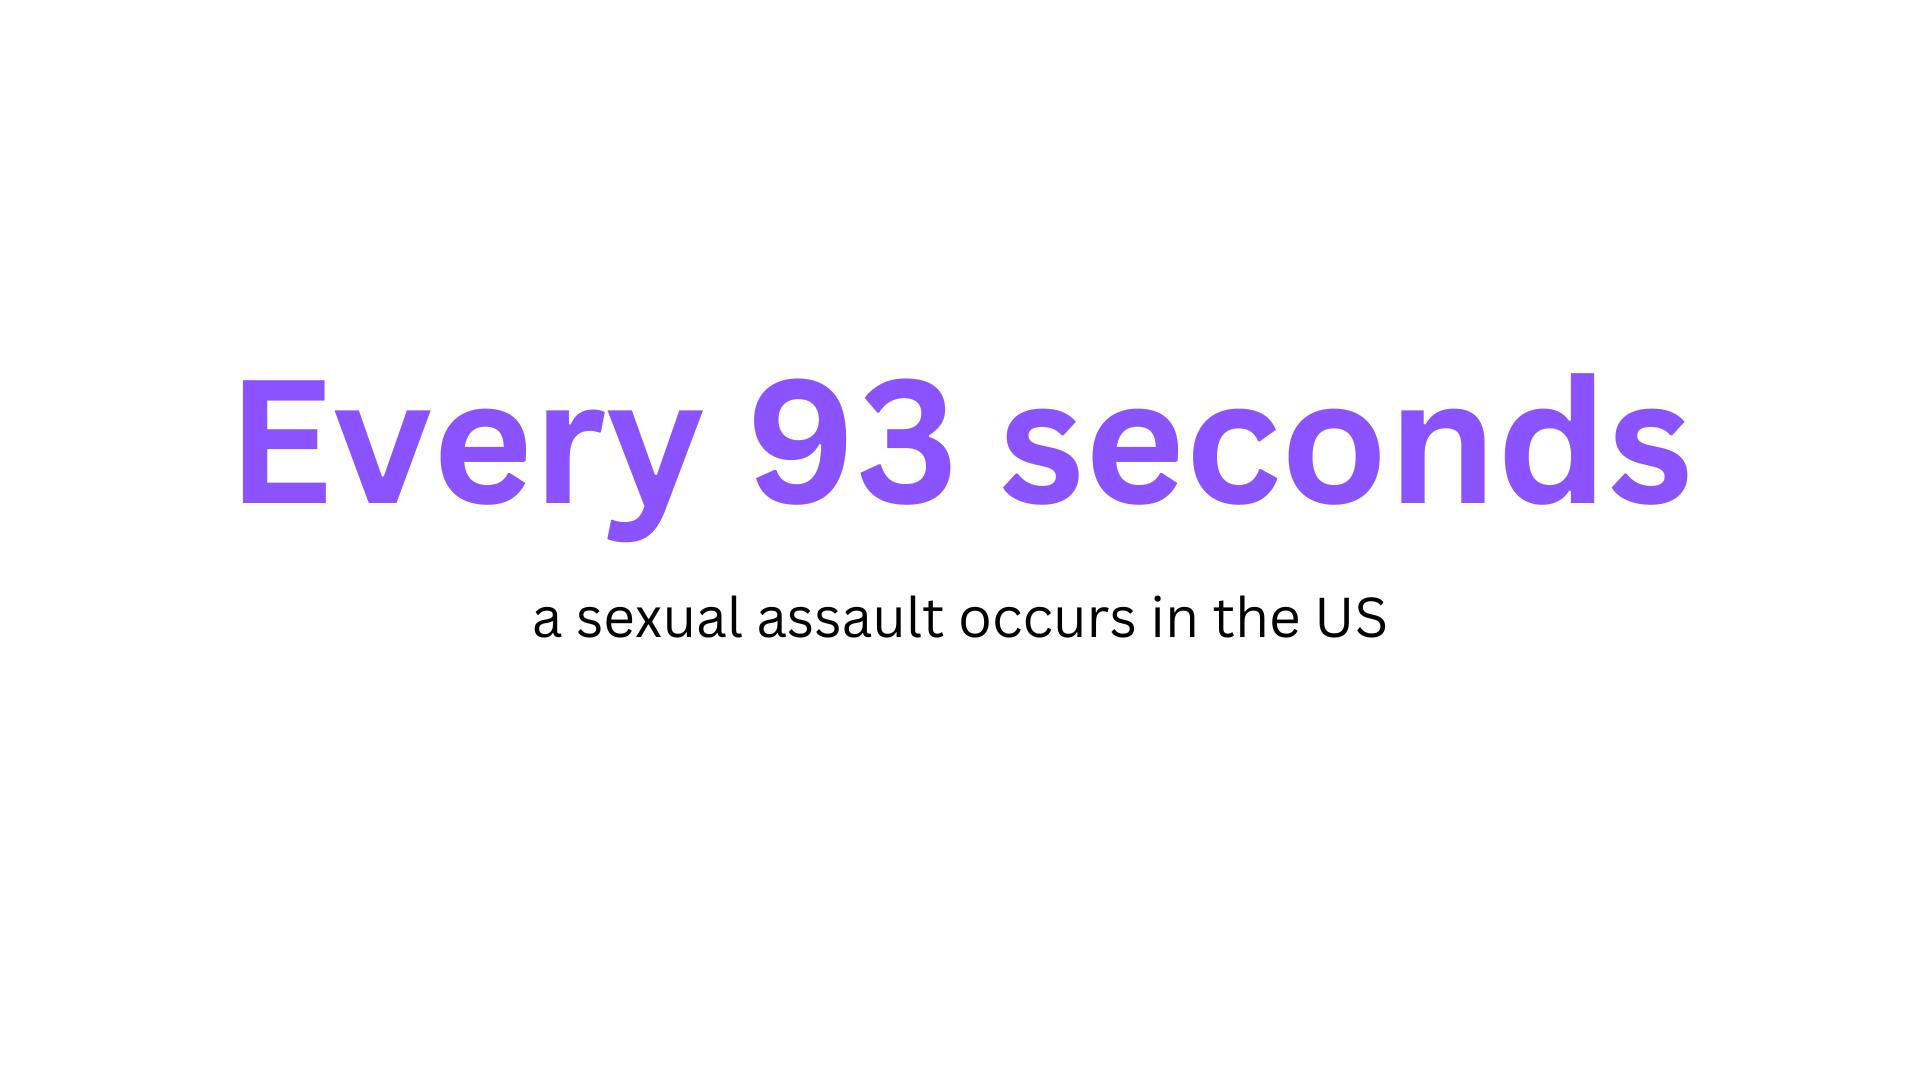 Sexual Harassment Statistics - The alarming frequency of sexual assaults in the US